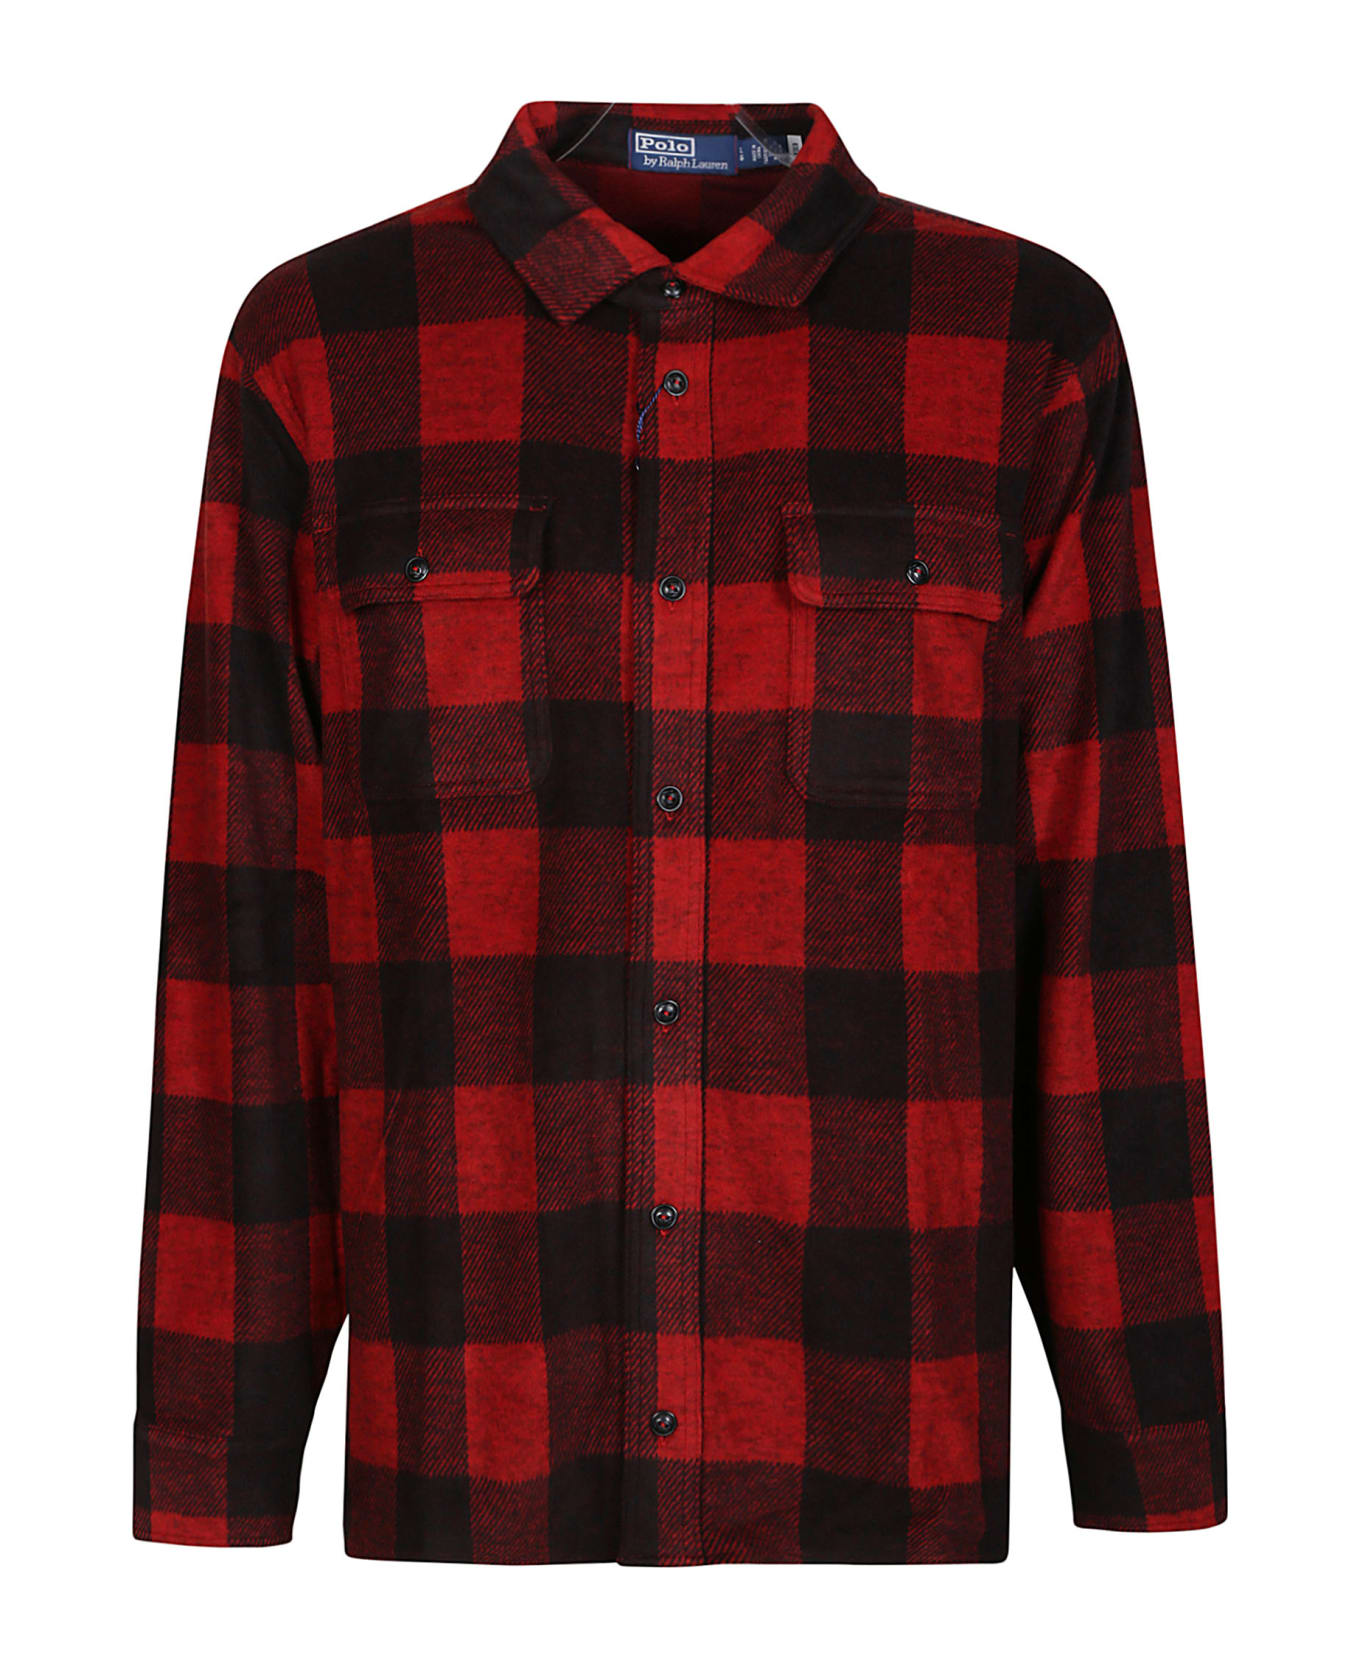 Polo Ralph Lauren Red Checked Shirt - Red シャツ